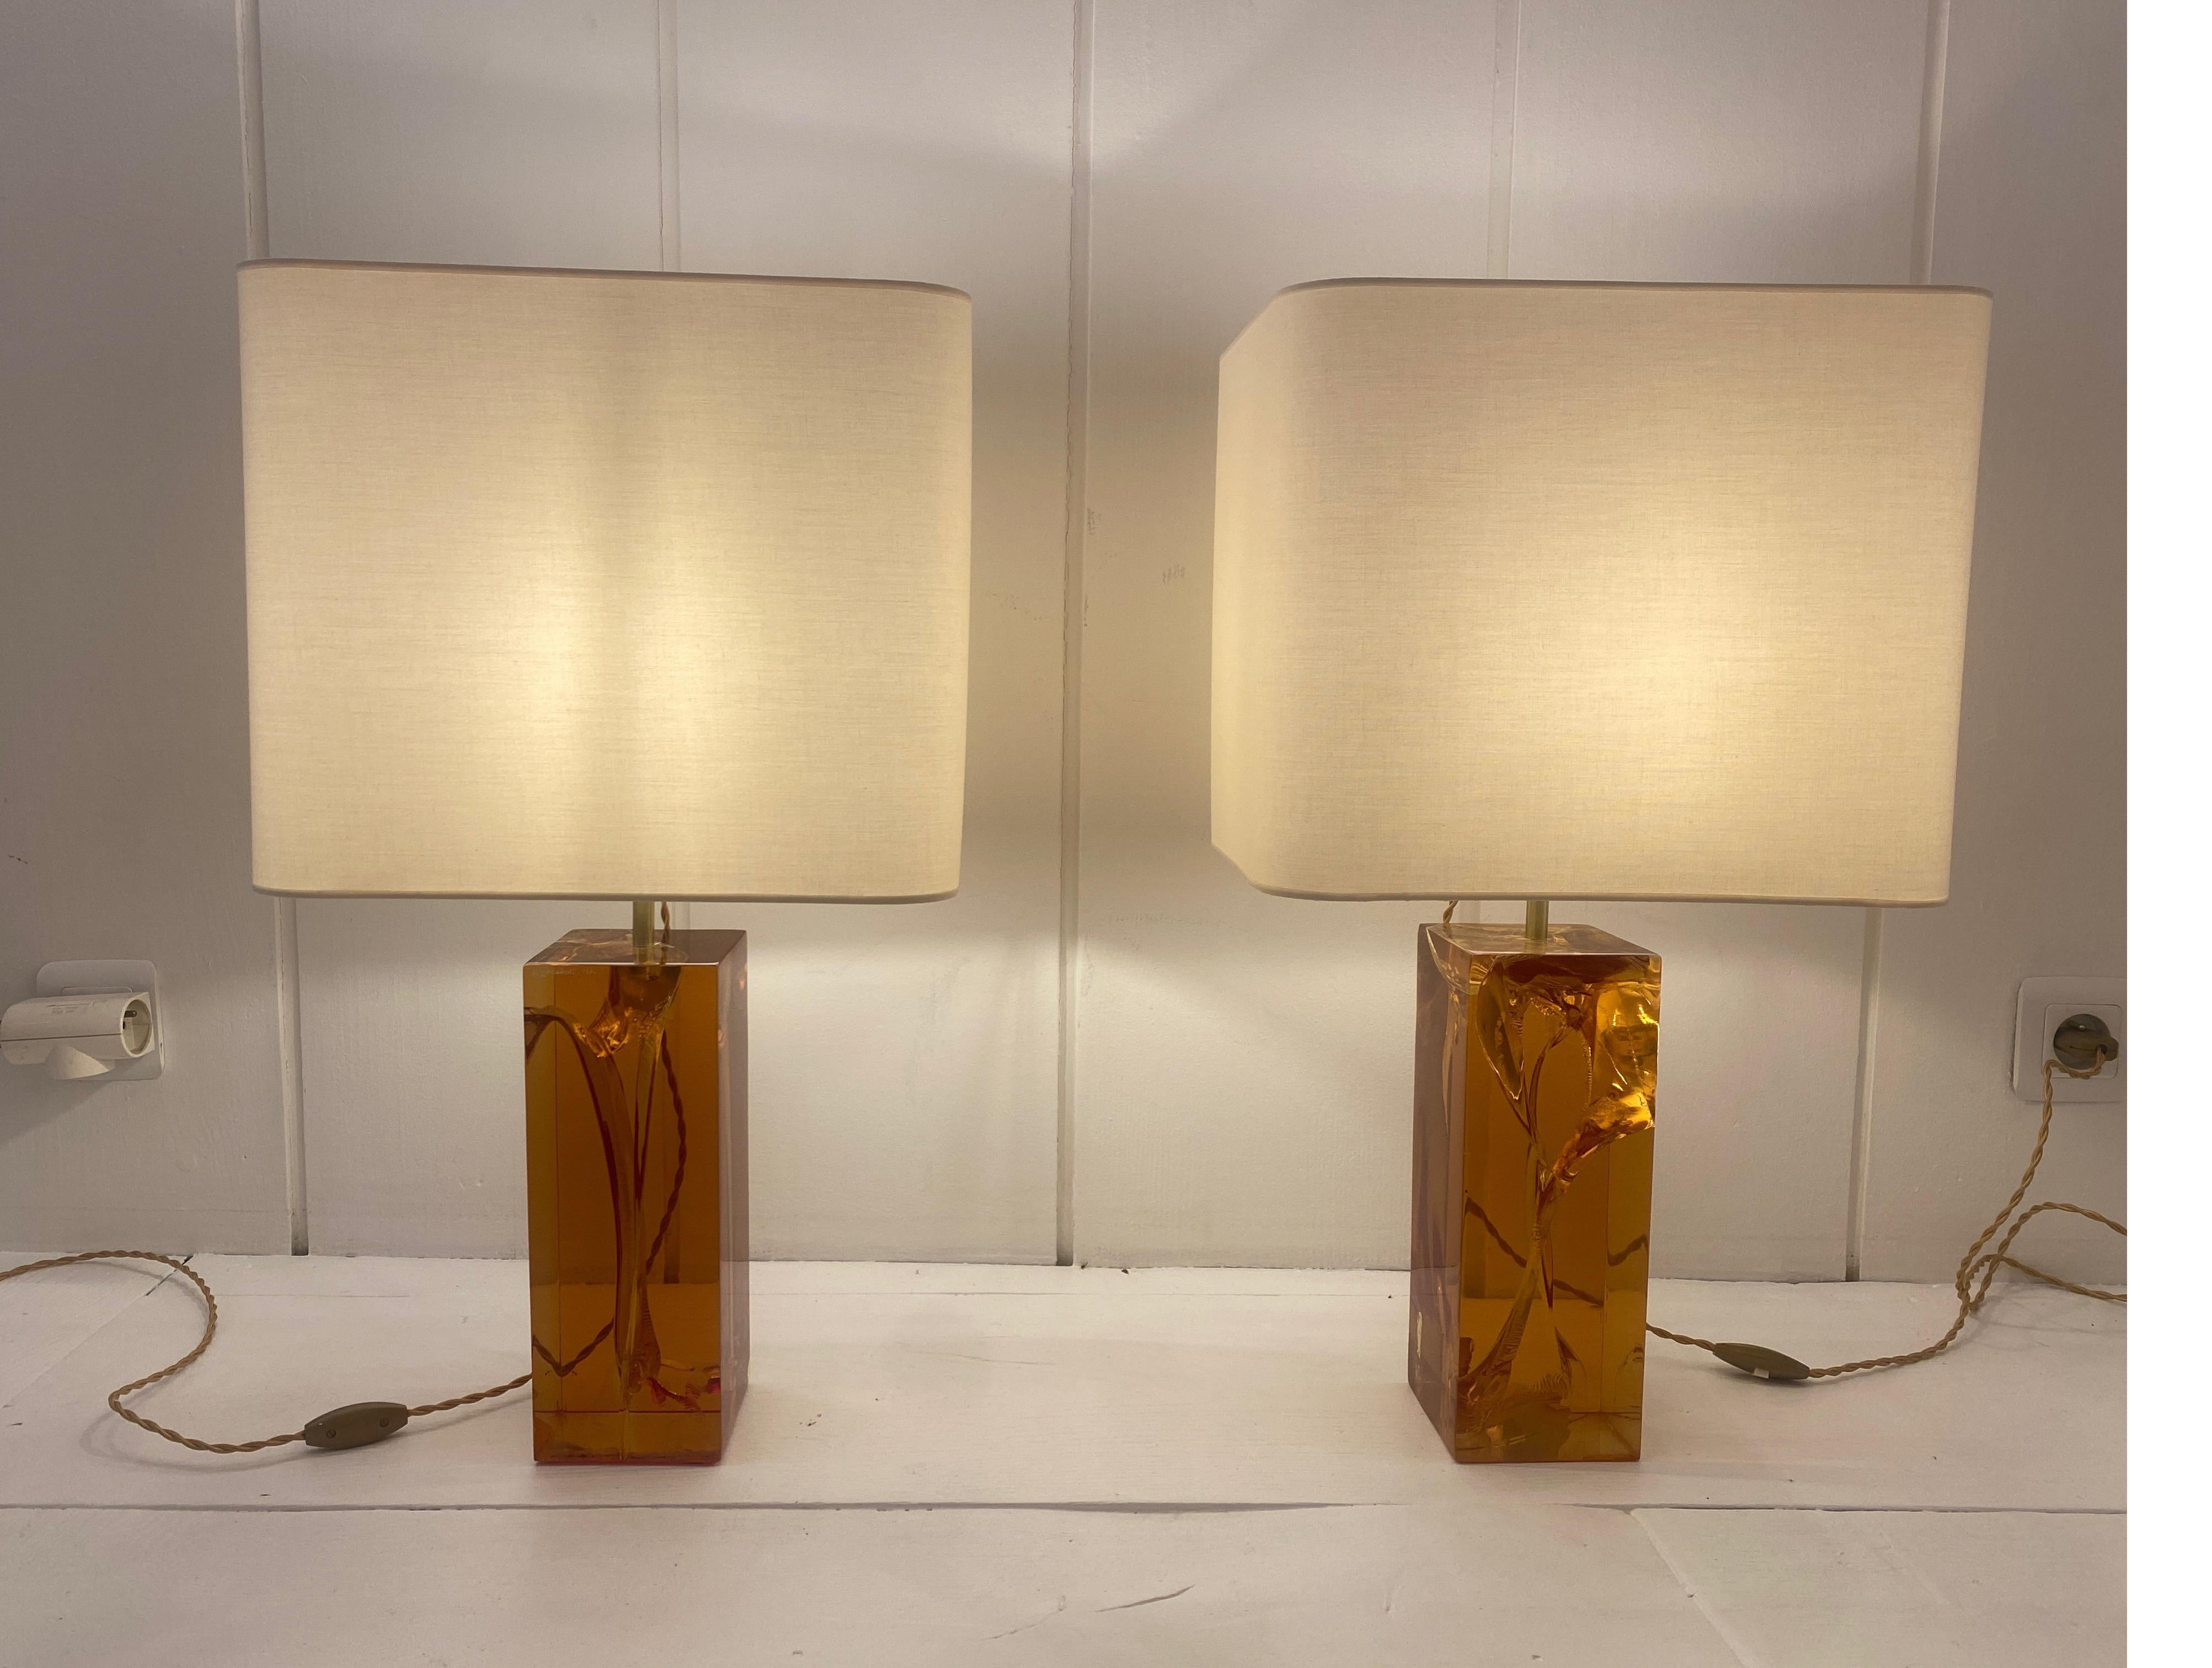 Rare pair of amber color fractal resin lamps by Francois Godelsky.
1 Lampe signed F Godelsky 1974.
Brand new shades.
Great vintage condition.
Rewire.